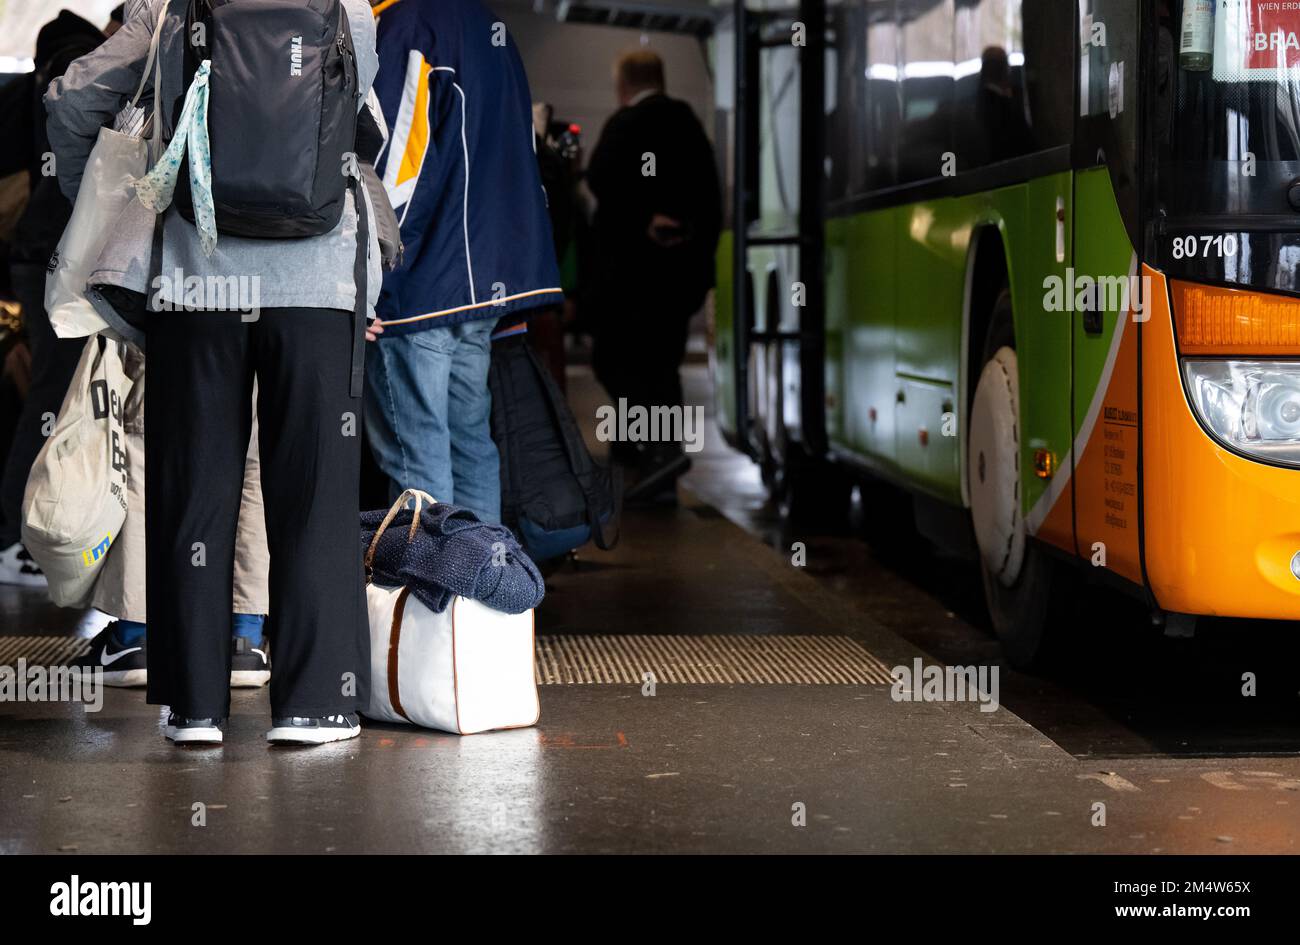 Munich, Germany. 23rd Dec, 2022. Travelers wait at the central bus station in Munich. Many people are rushing home for Christmas, and some are traveling further afield: Germany's roads are at risk of traffic jams over the Christmas period due to the heavy travel traffic around the festive season. In Bavaria, the ADAC expects the A3 Frankfurt-Nuremberg-Passau, the A8 Stuttgart-Munich-Salzburg or the A9 Munich-Nuremberg-Berlin, among others, to reach their capacity limits. Credit: Sven Hoppe/dpa/Alamy Live News Stock Photo